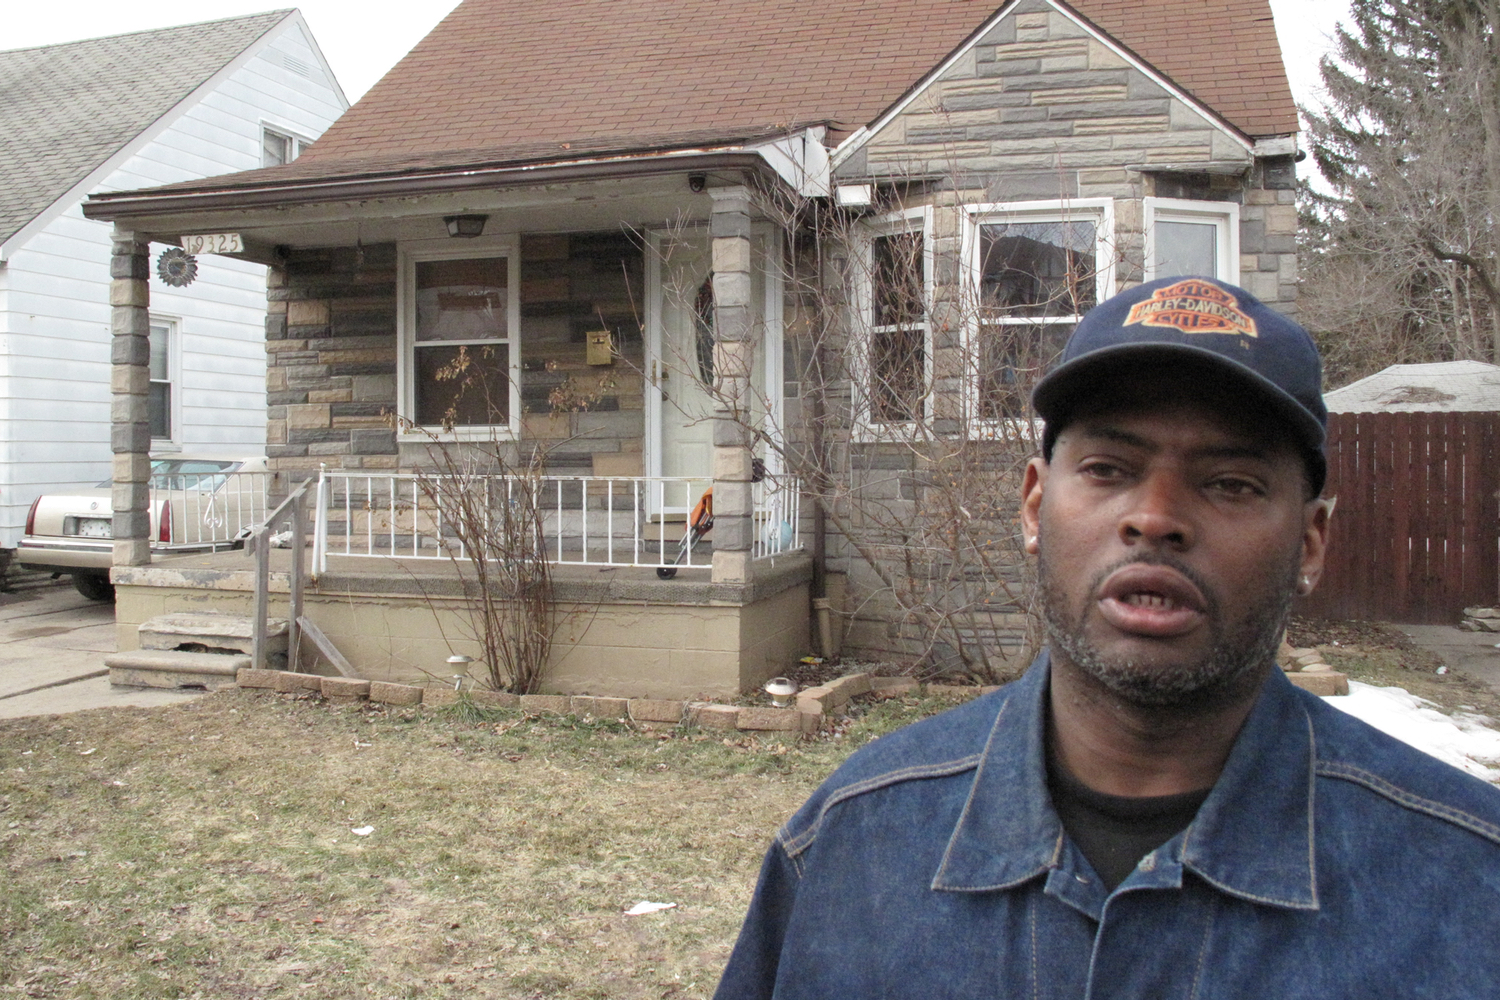 Detroit resident Rodney Frazier, a pressman who lives on Teppert Street, has three abandoned homes across from his own. (photo by Bill McGraw)